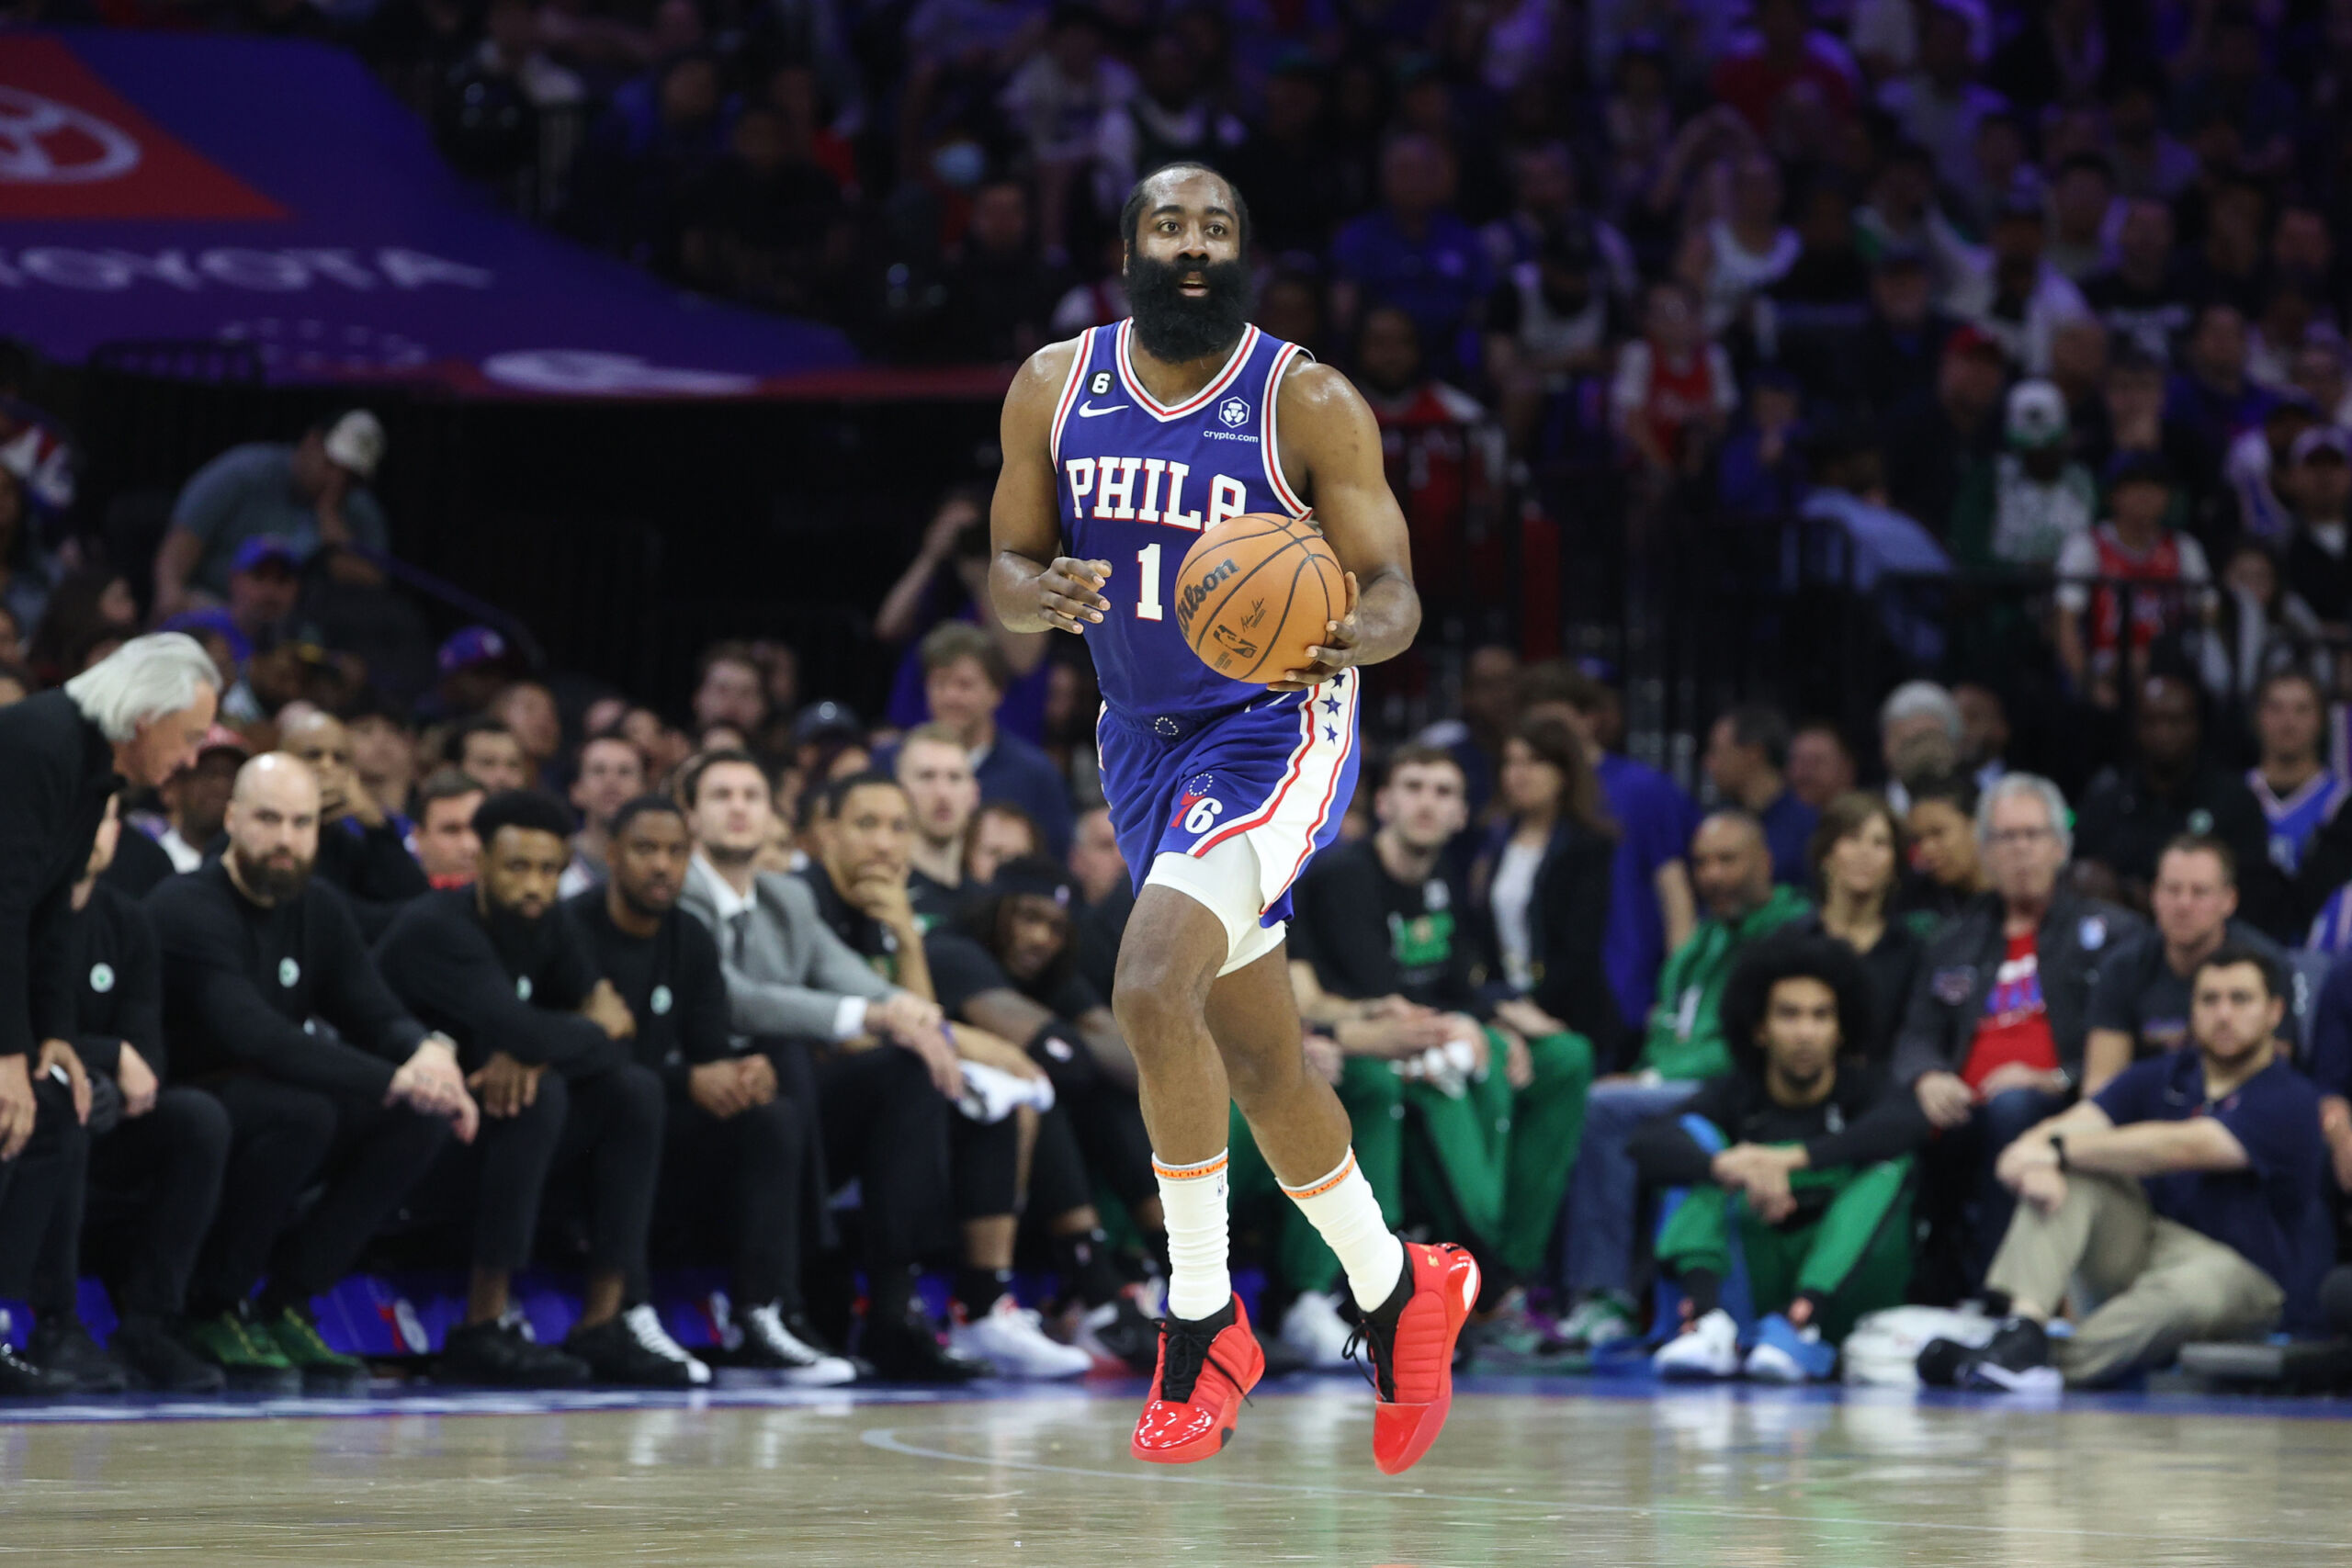 James Harden bypasses free agency, explores trade from 76ers - The